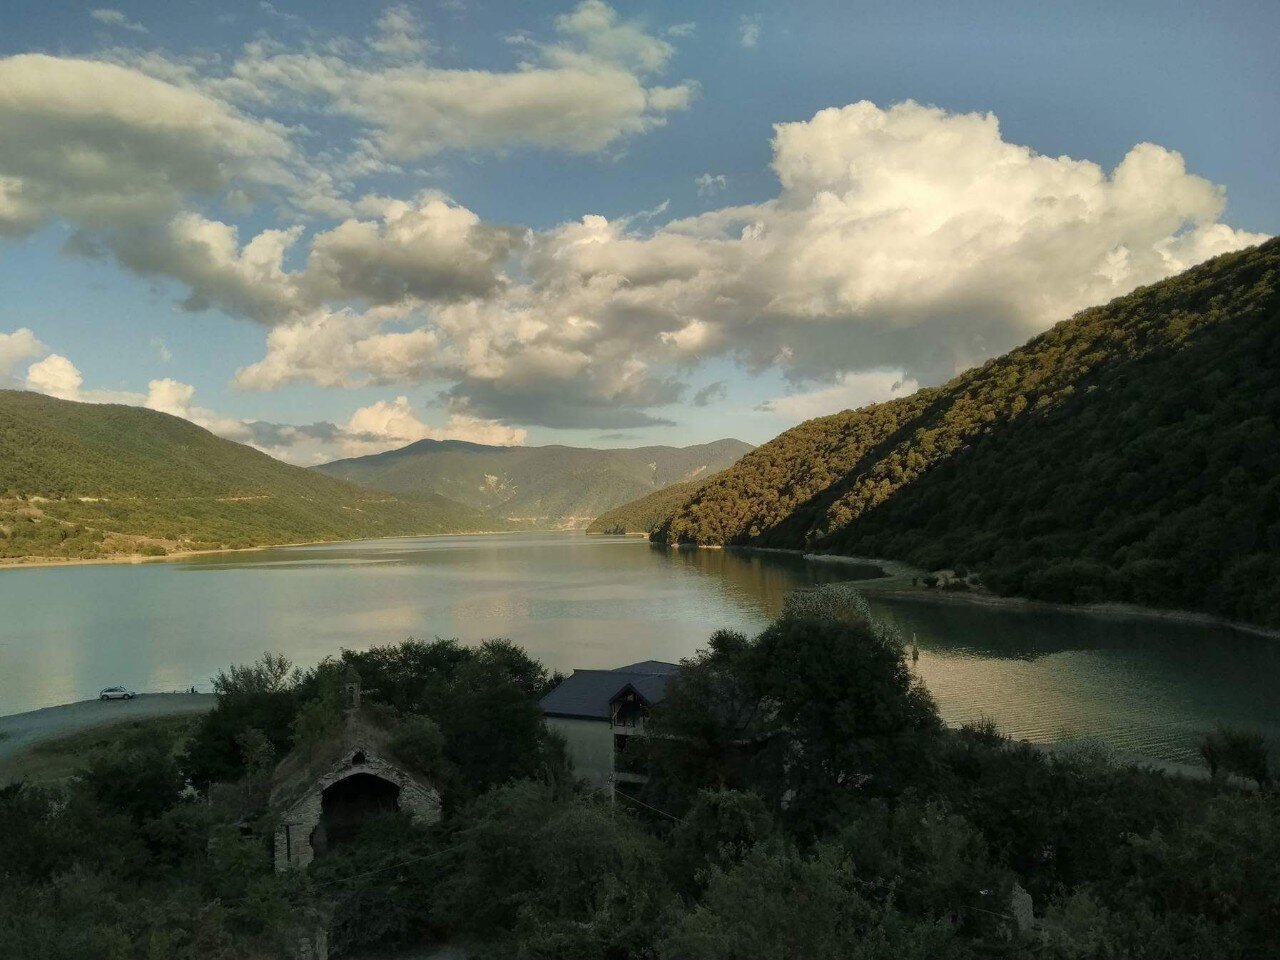 View of the Zhinvali Reservoir